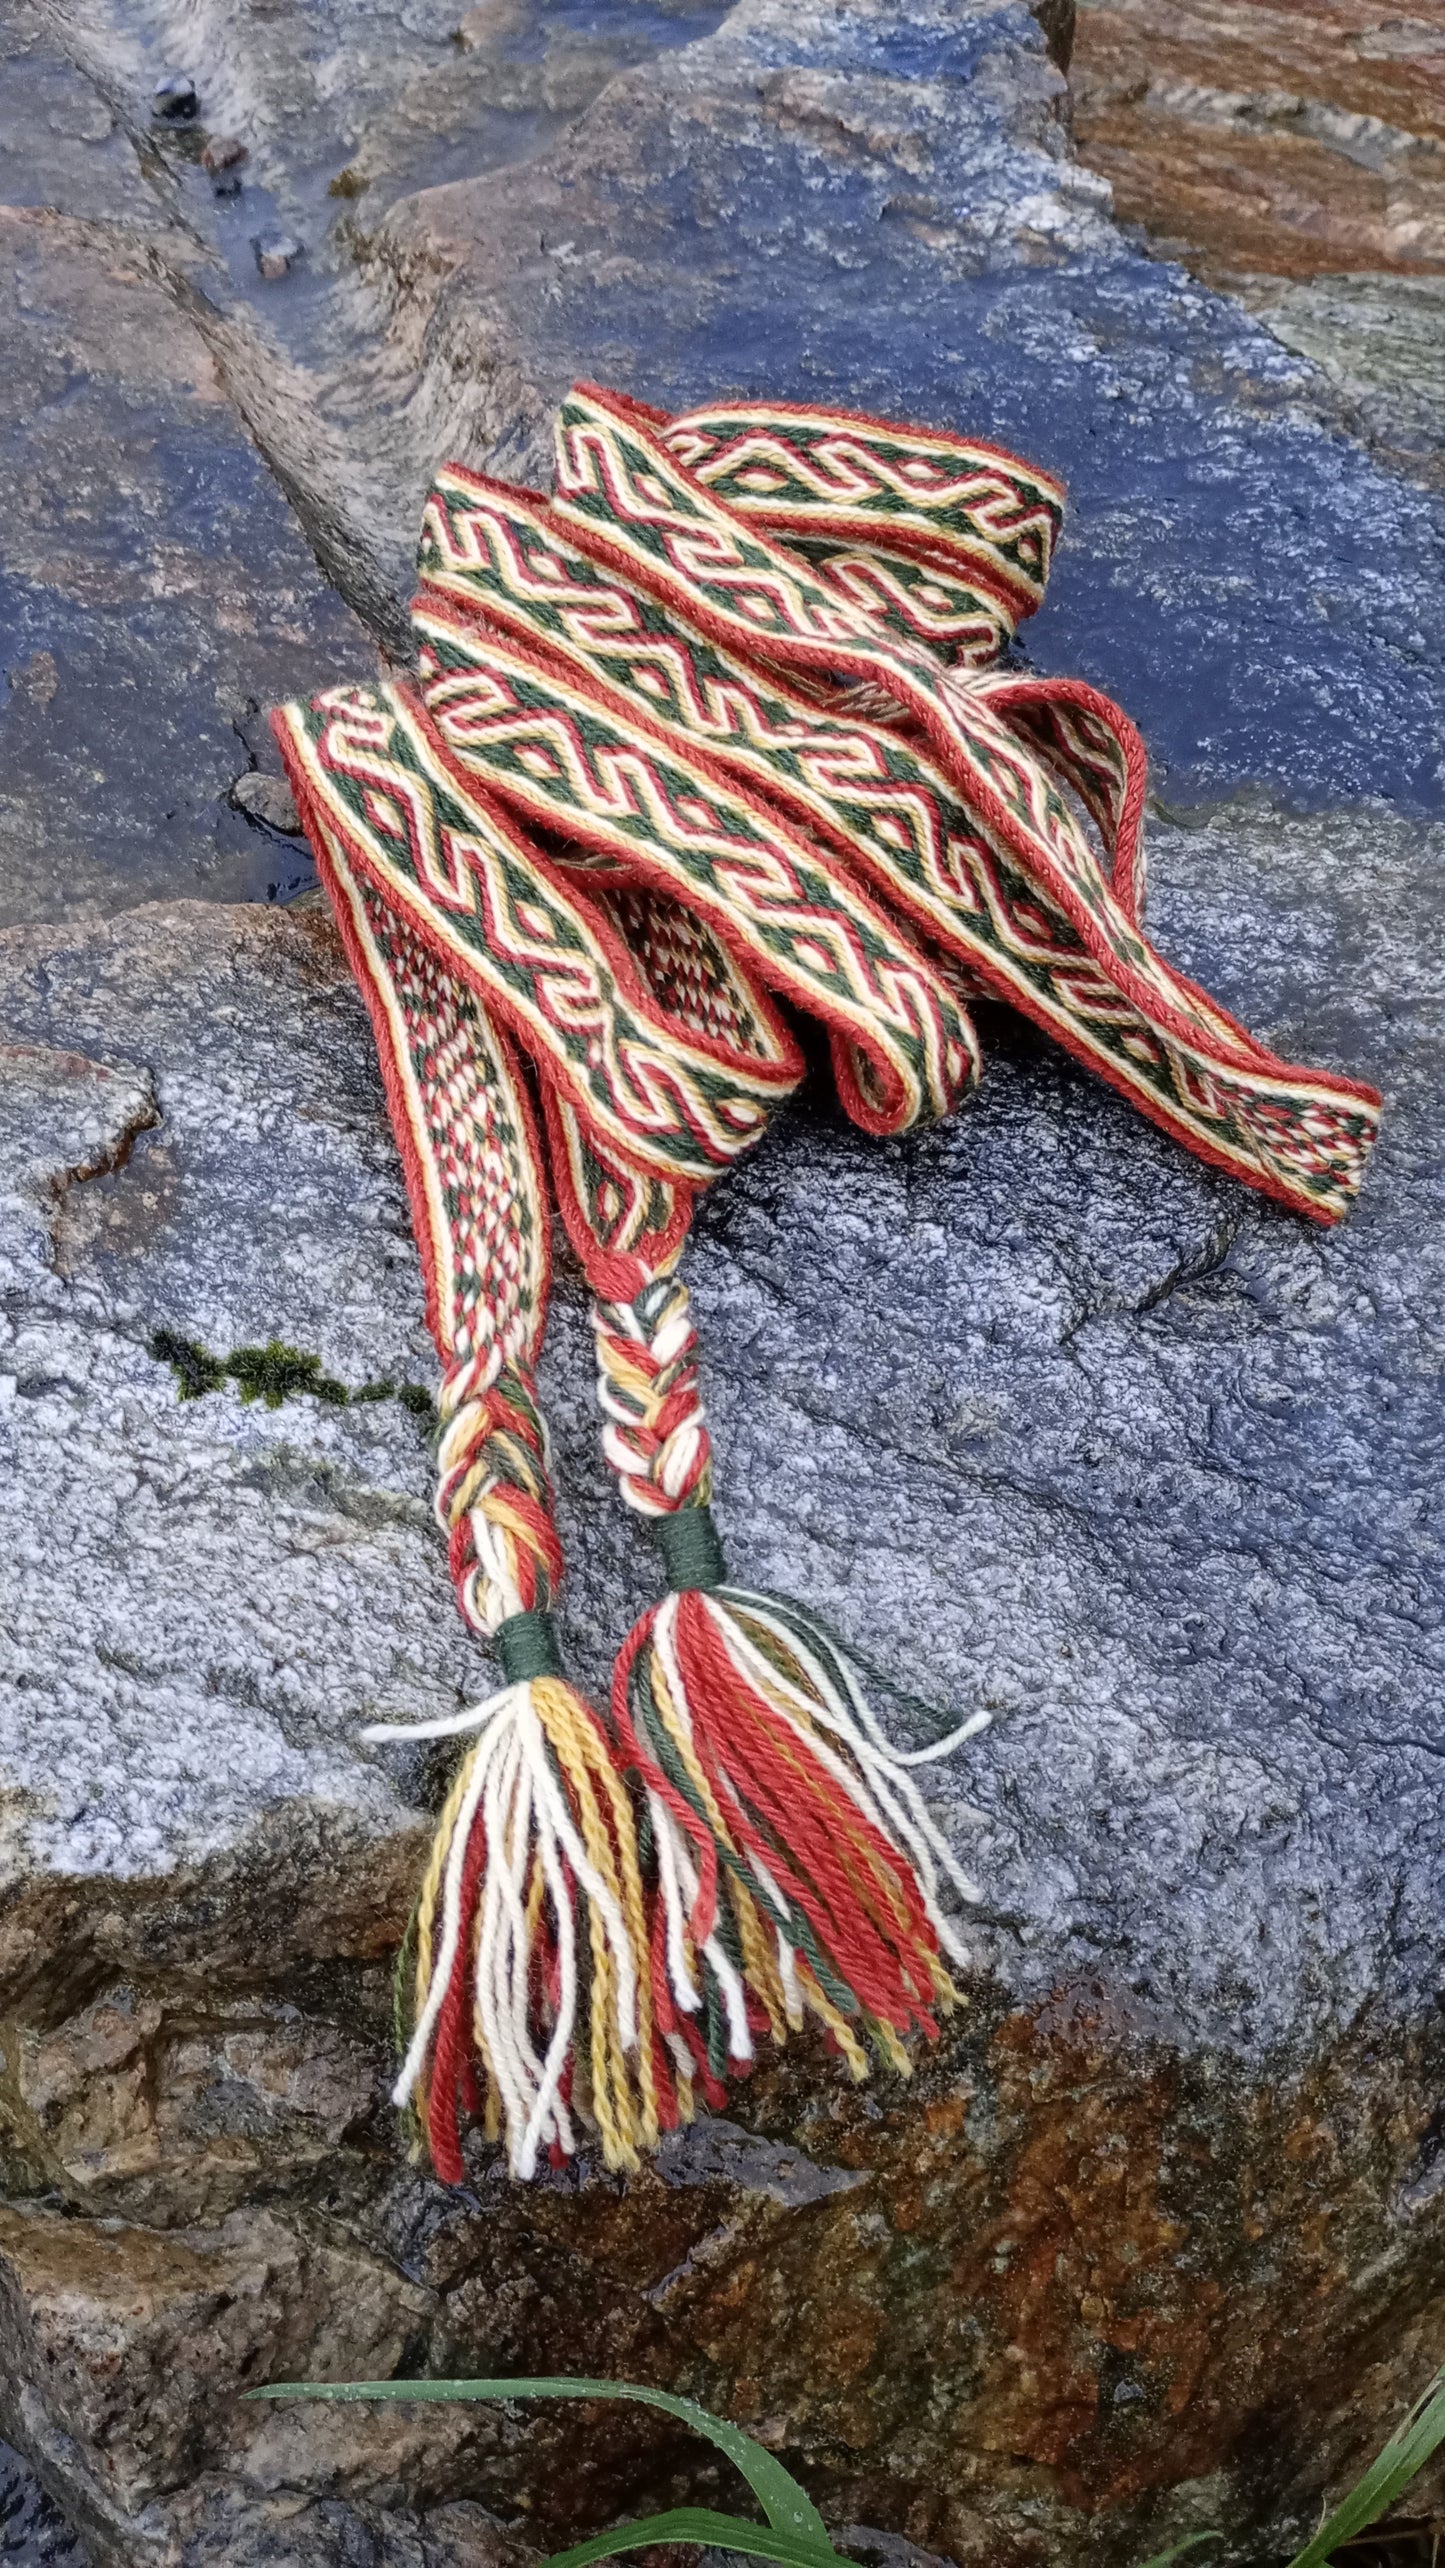 Colorful band with folded line pattern